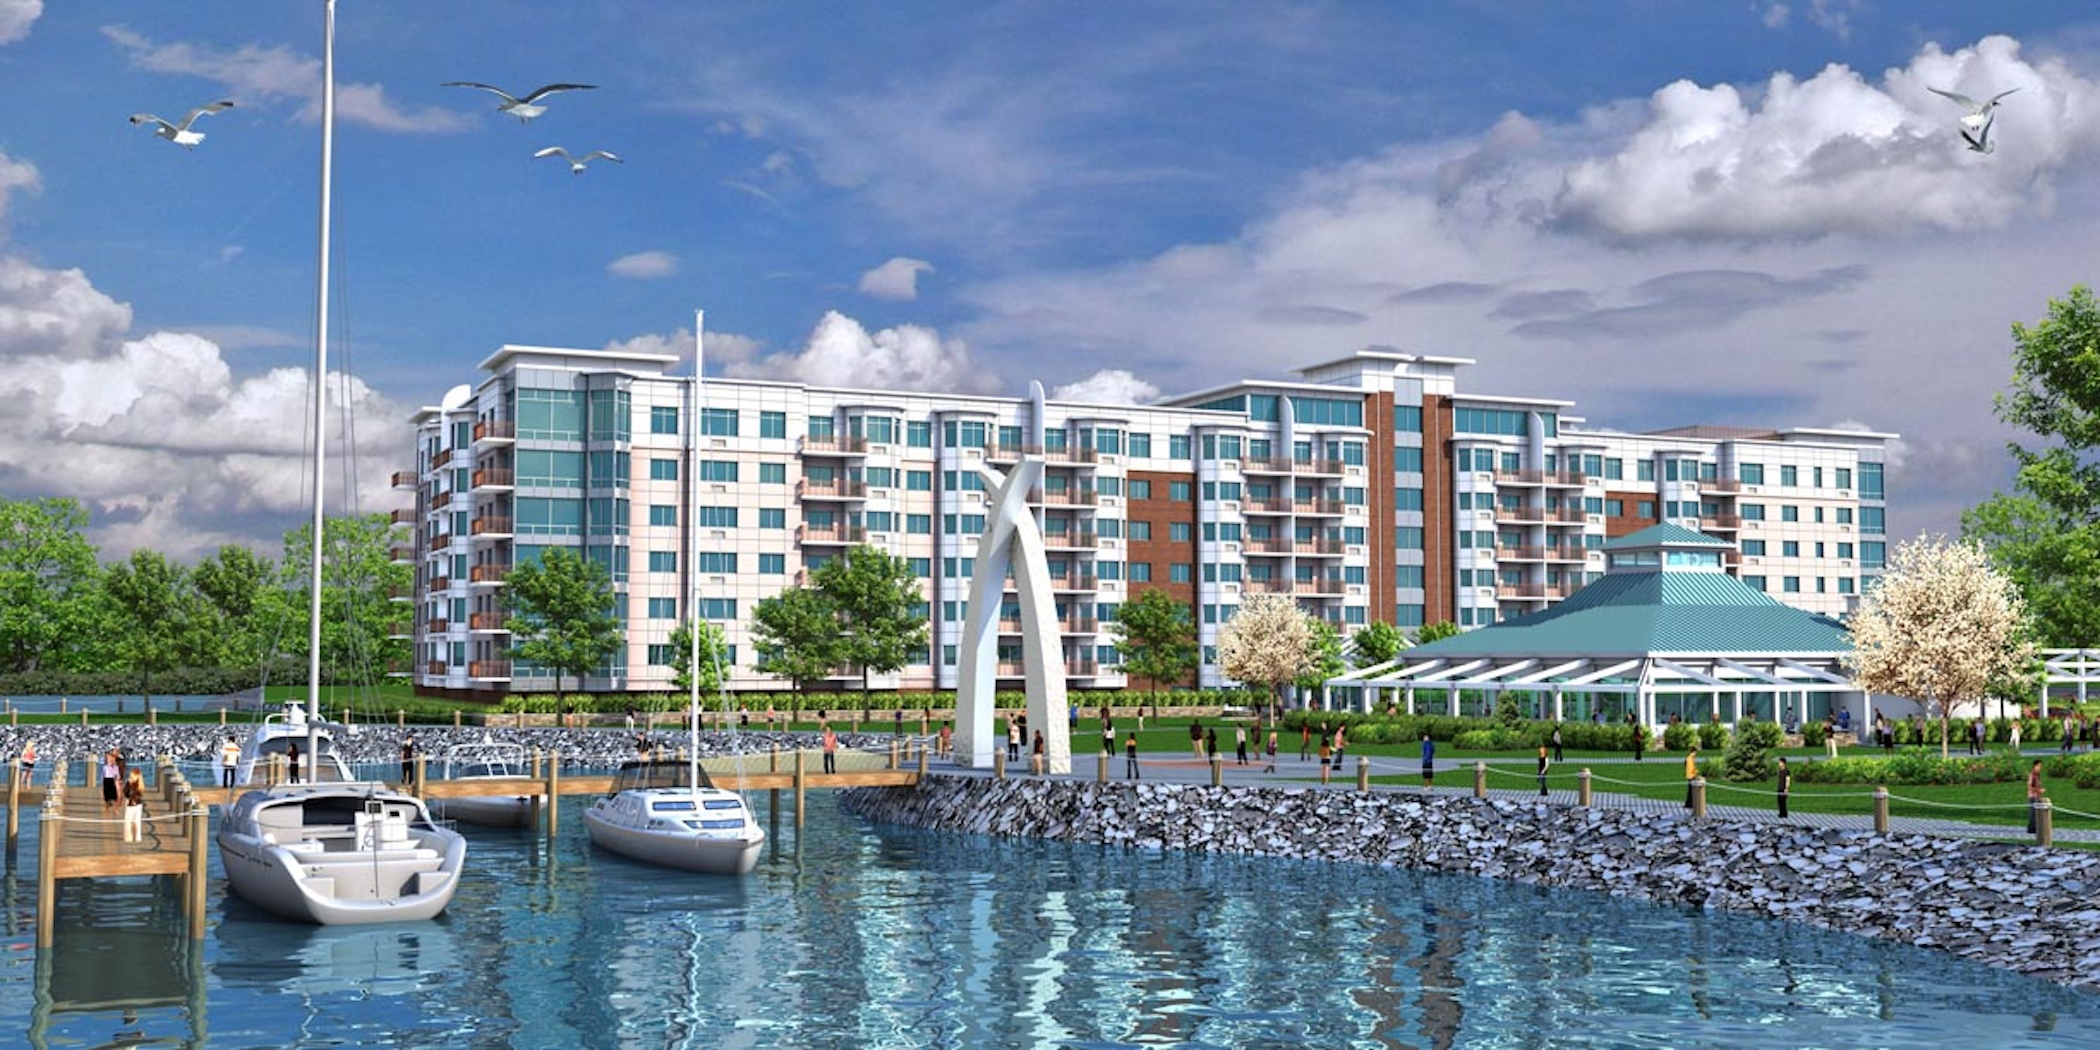 Harbor Square, a 188-unit luxury rental community on the Hudson River scheduled to open in spring of 2015